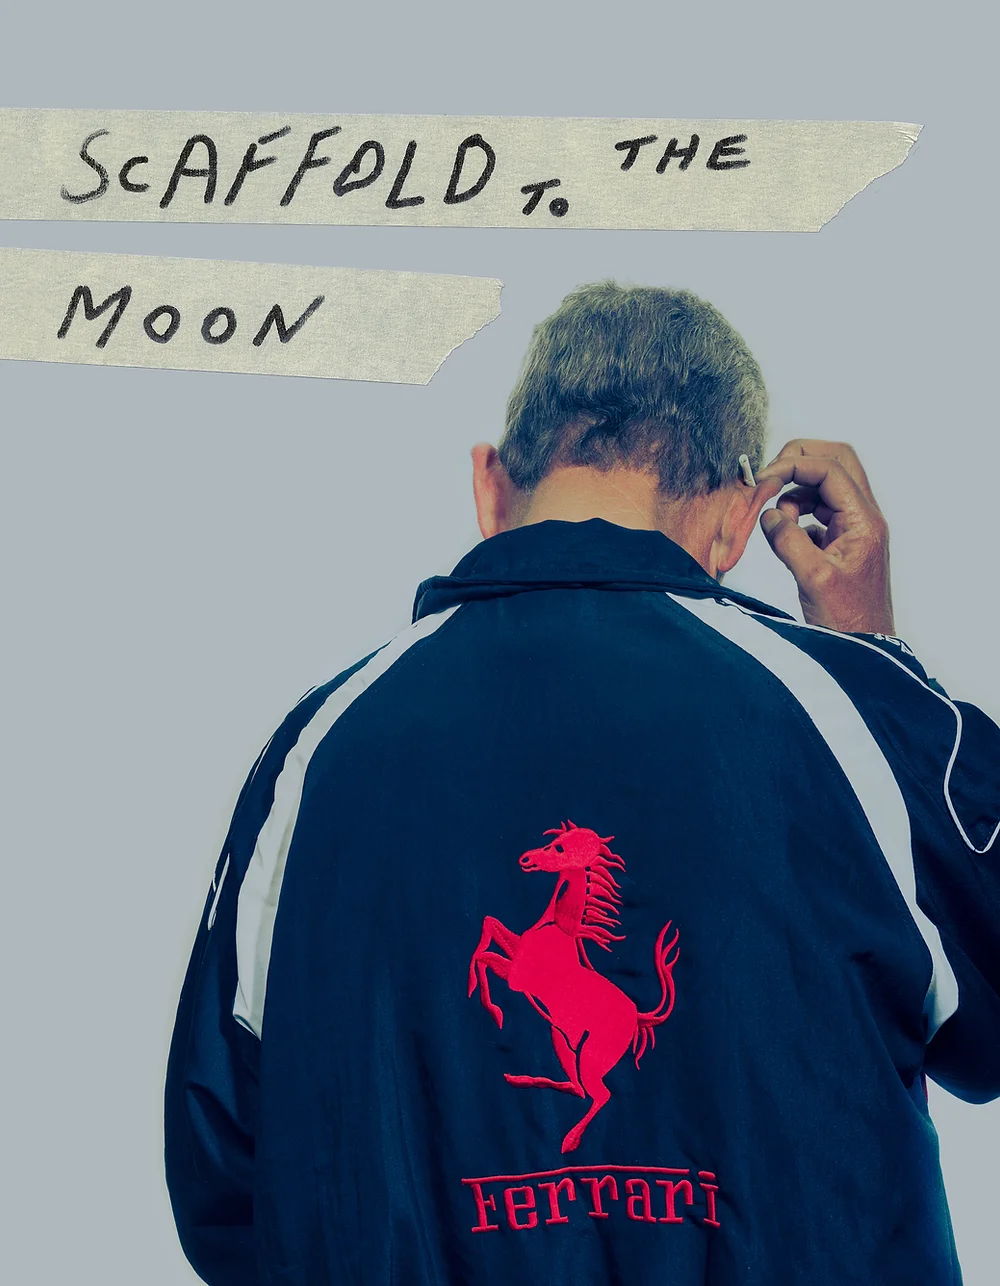 Scaffold to the Moon Huw Alden Davies